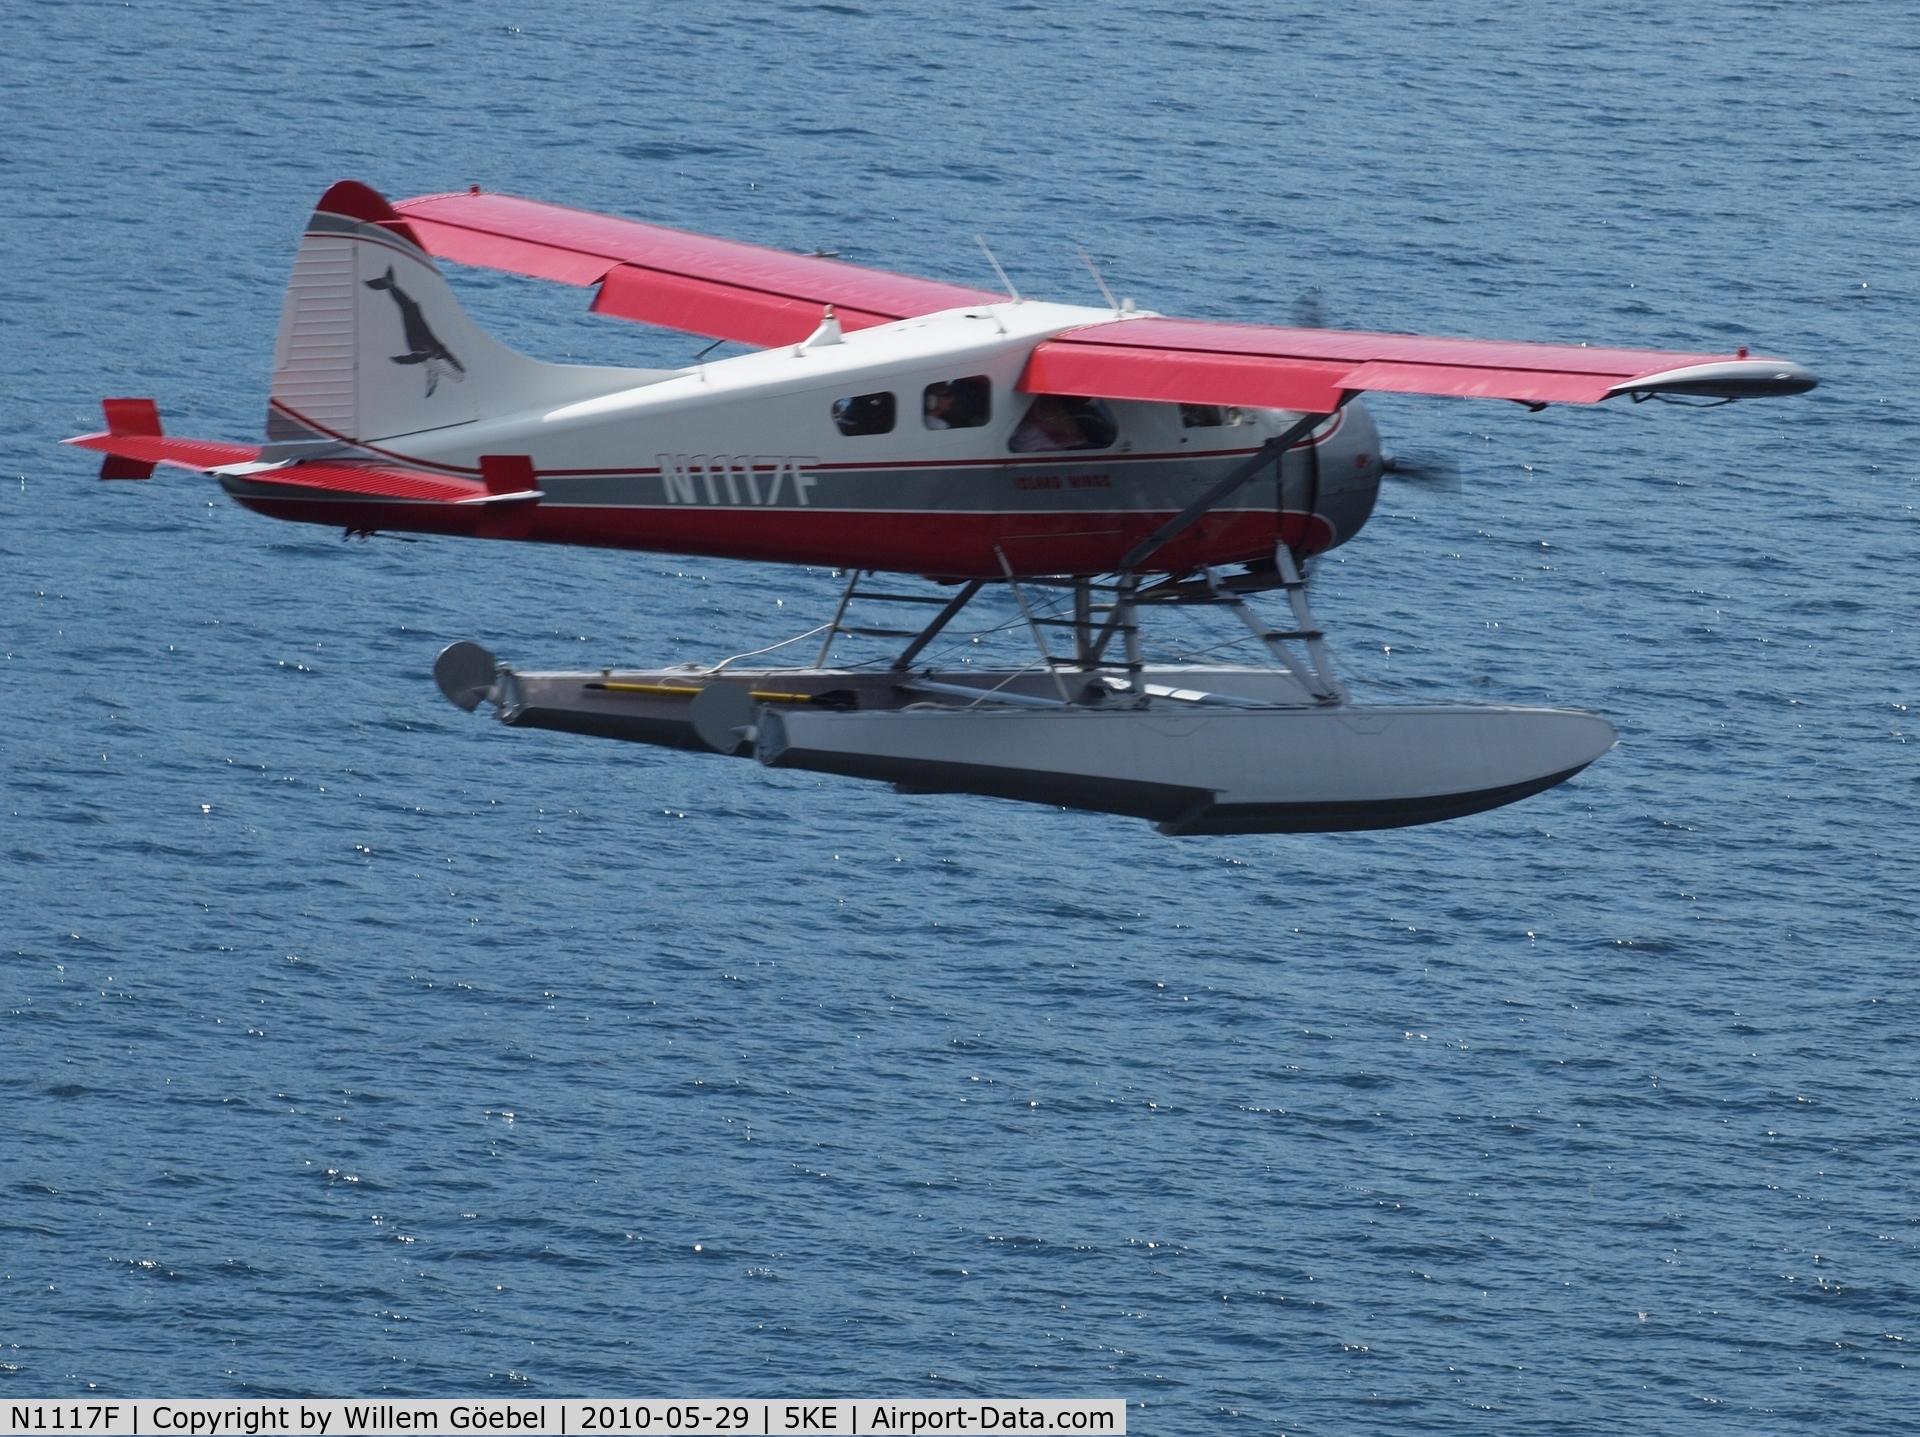 N1117F, 1958 De Havilland Canada DHC-2 Beaver Mk.1 C/N 1369, The picture is taken from the MV Statendam